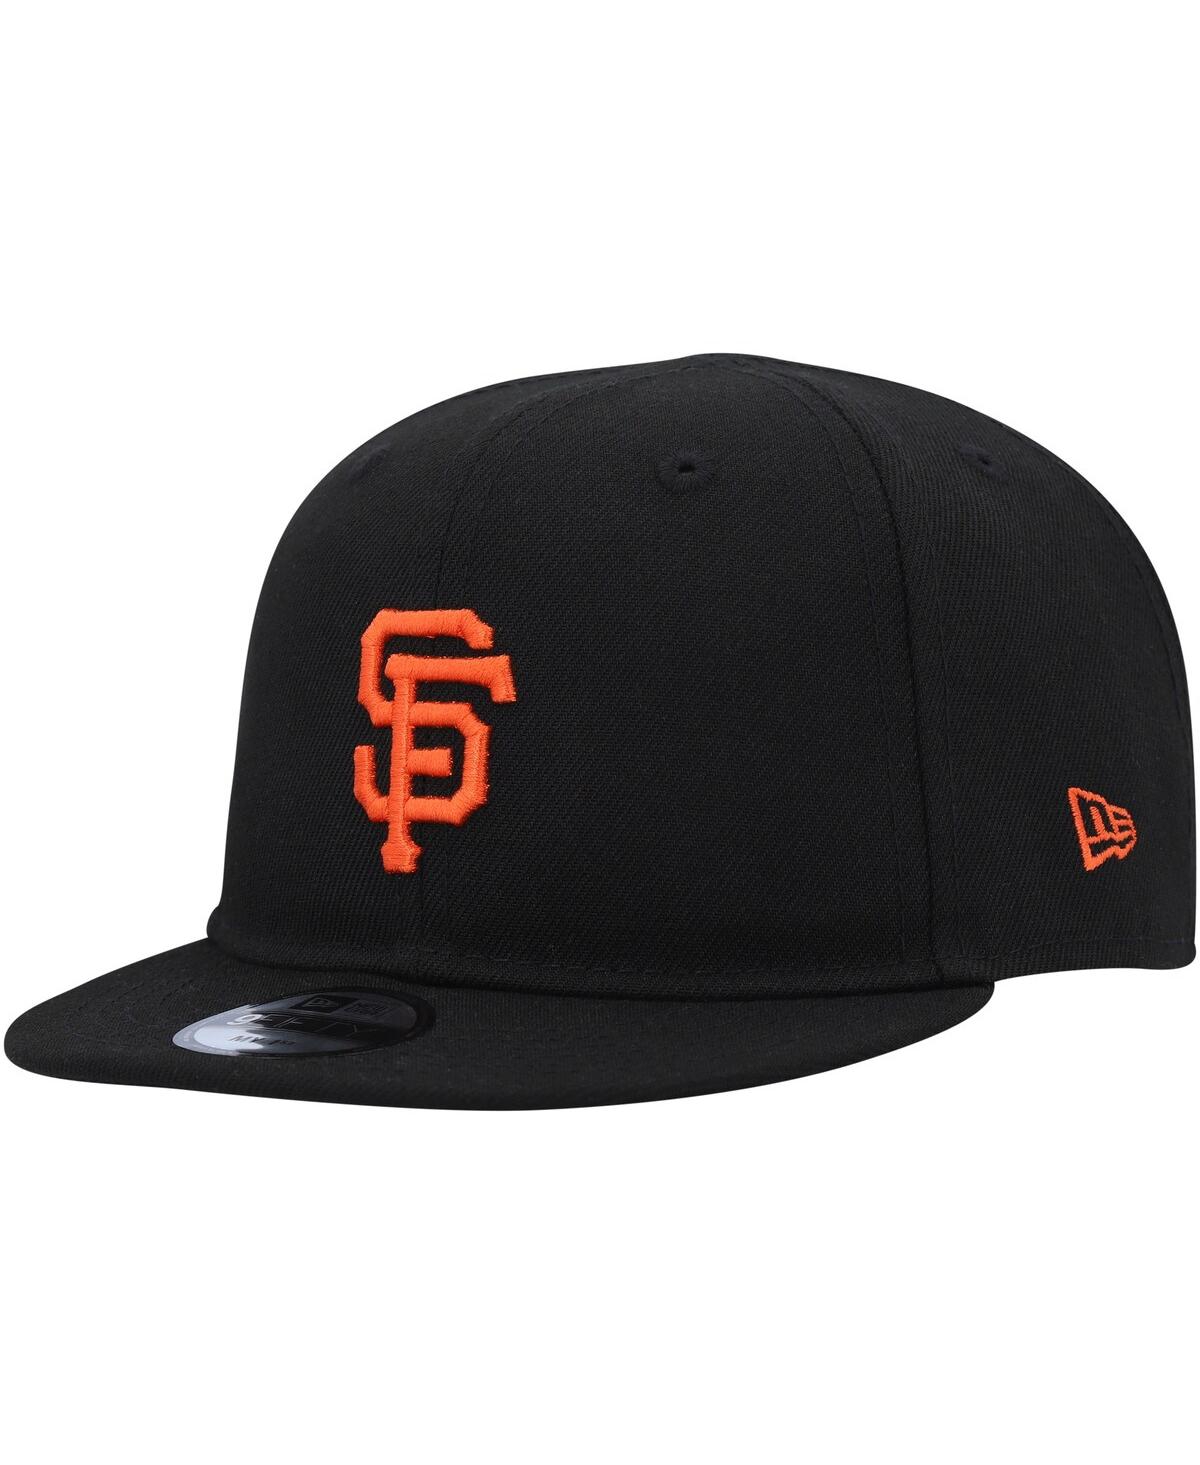 New Era Babies' Infant Boys And Girls  Black San Francisco Giants My First 9fifty Adjustable Hat